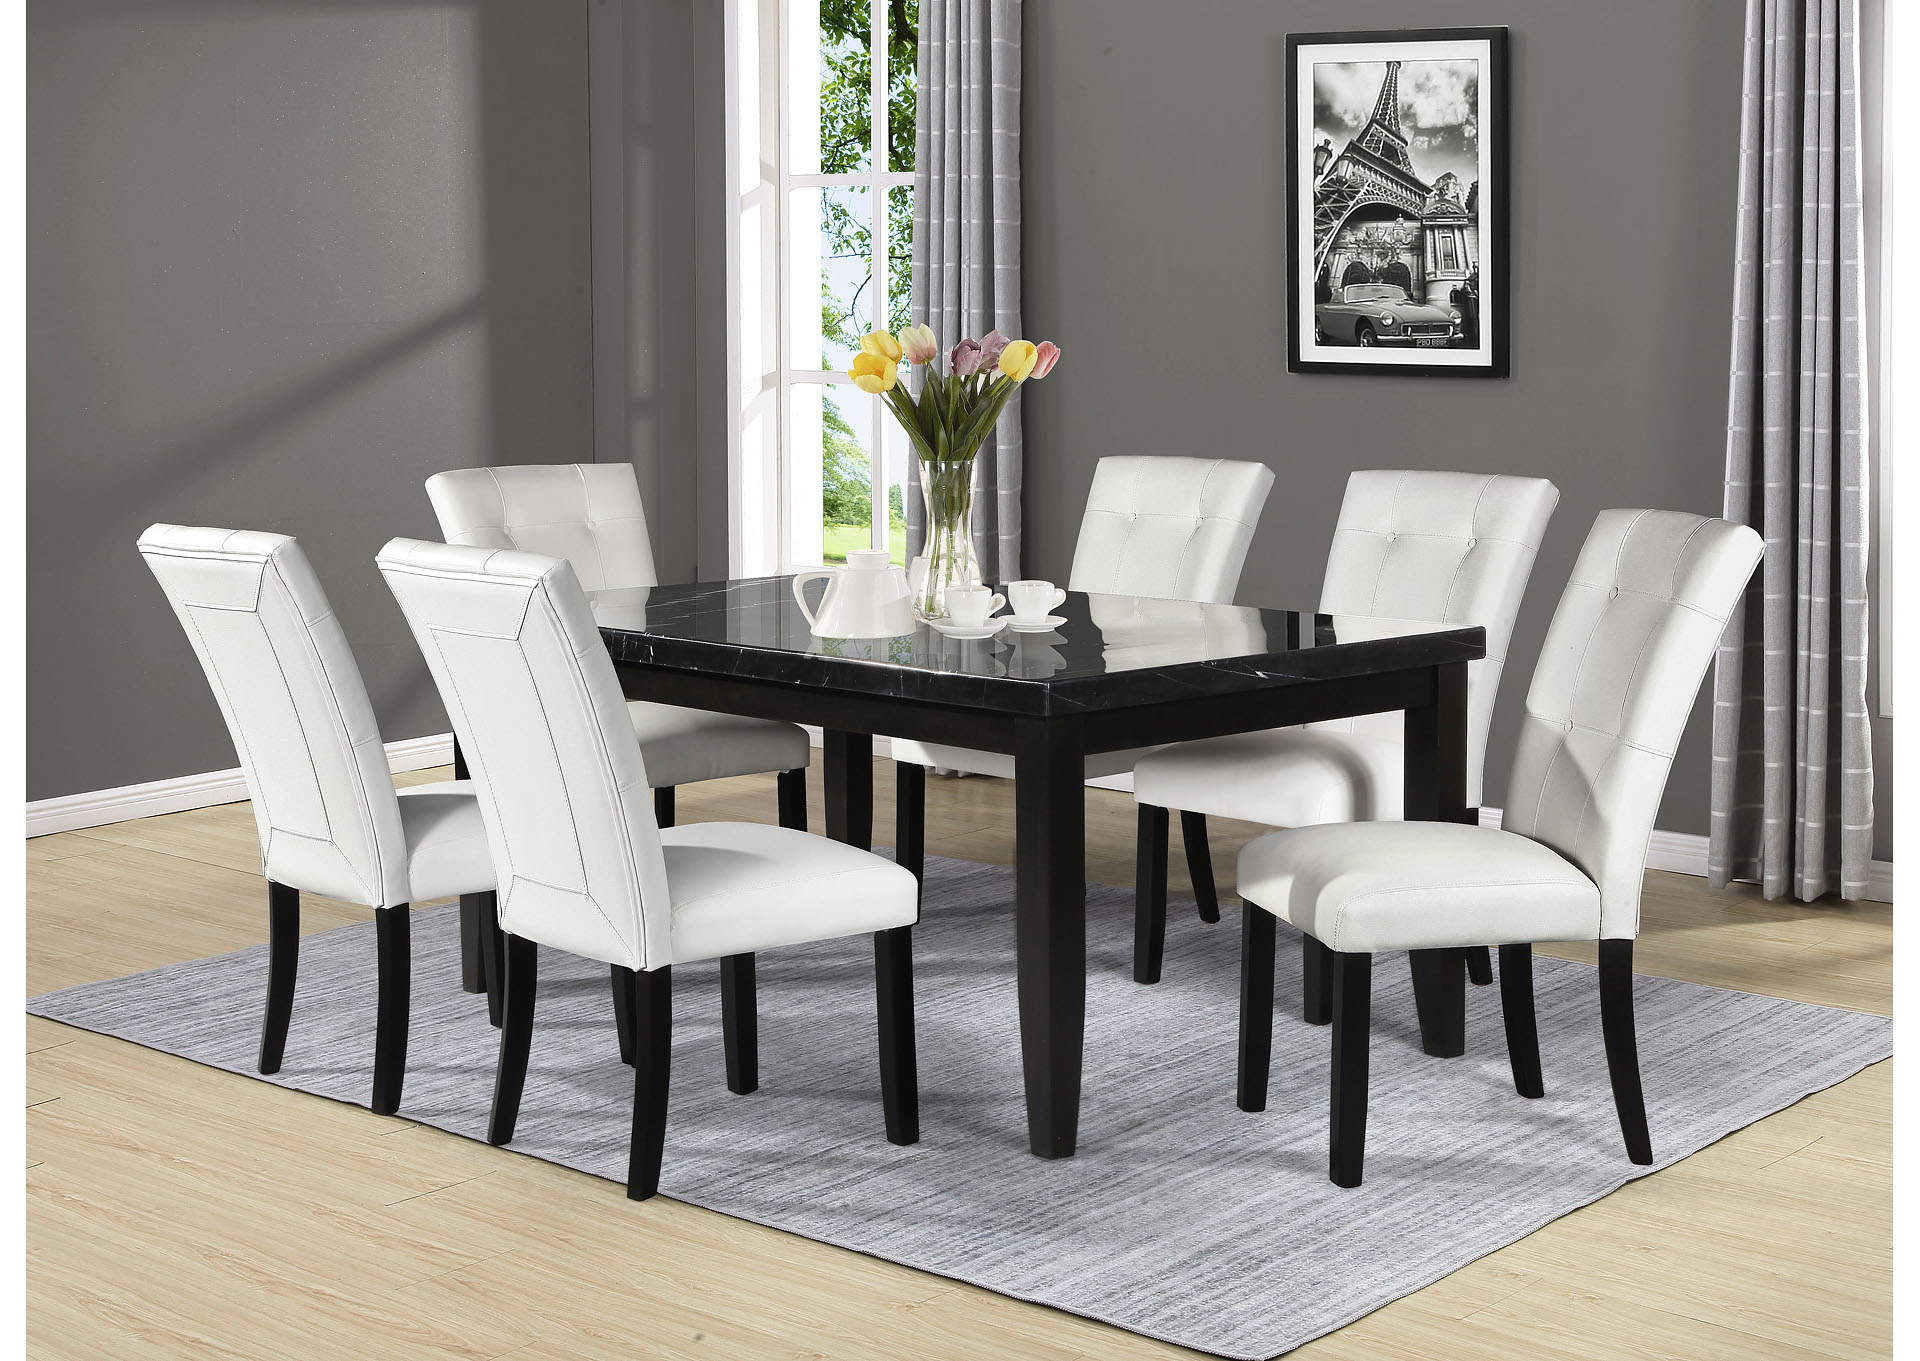 Markina Black Rectangular Marble Top, Dining Room Table With 6 Chairs White